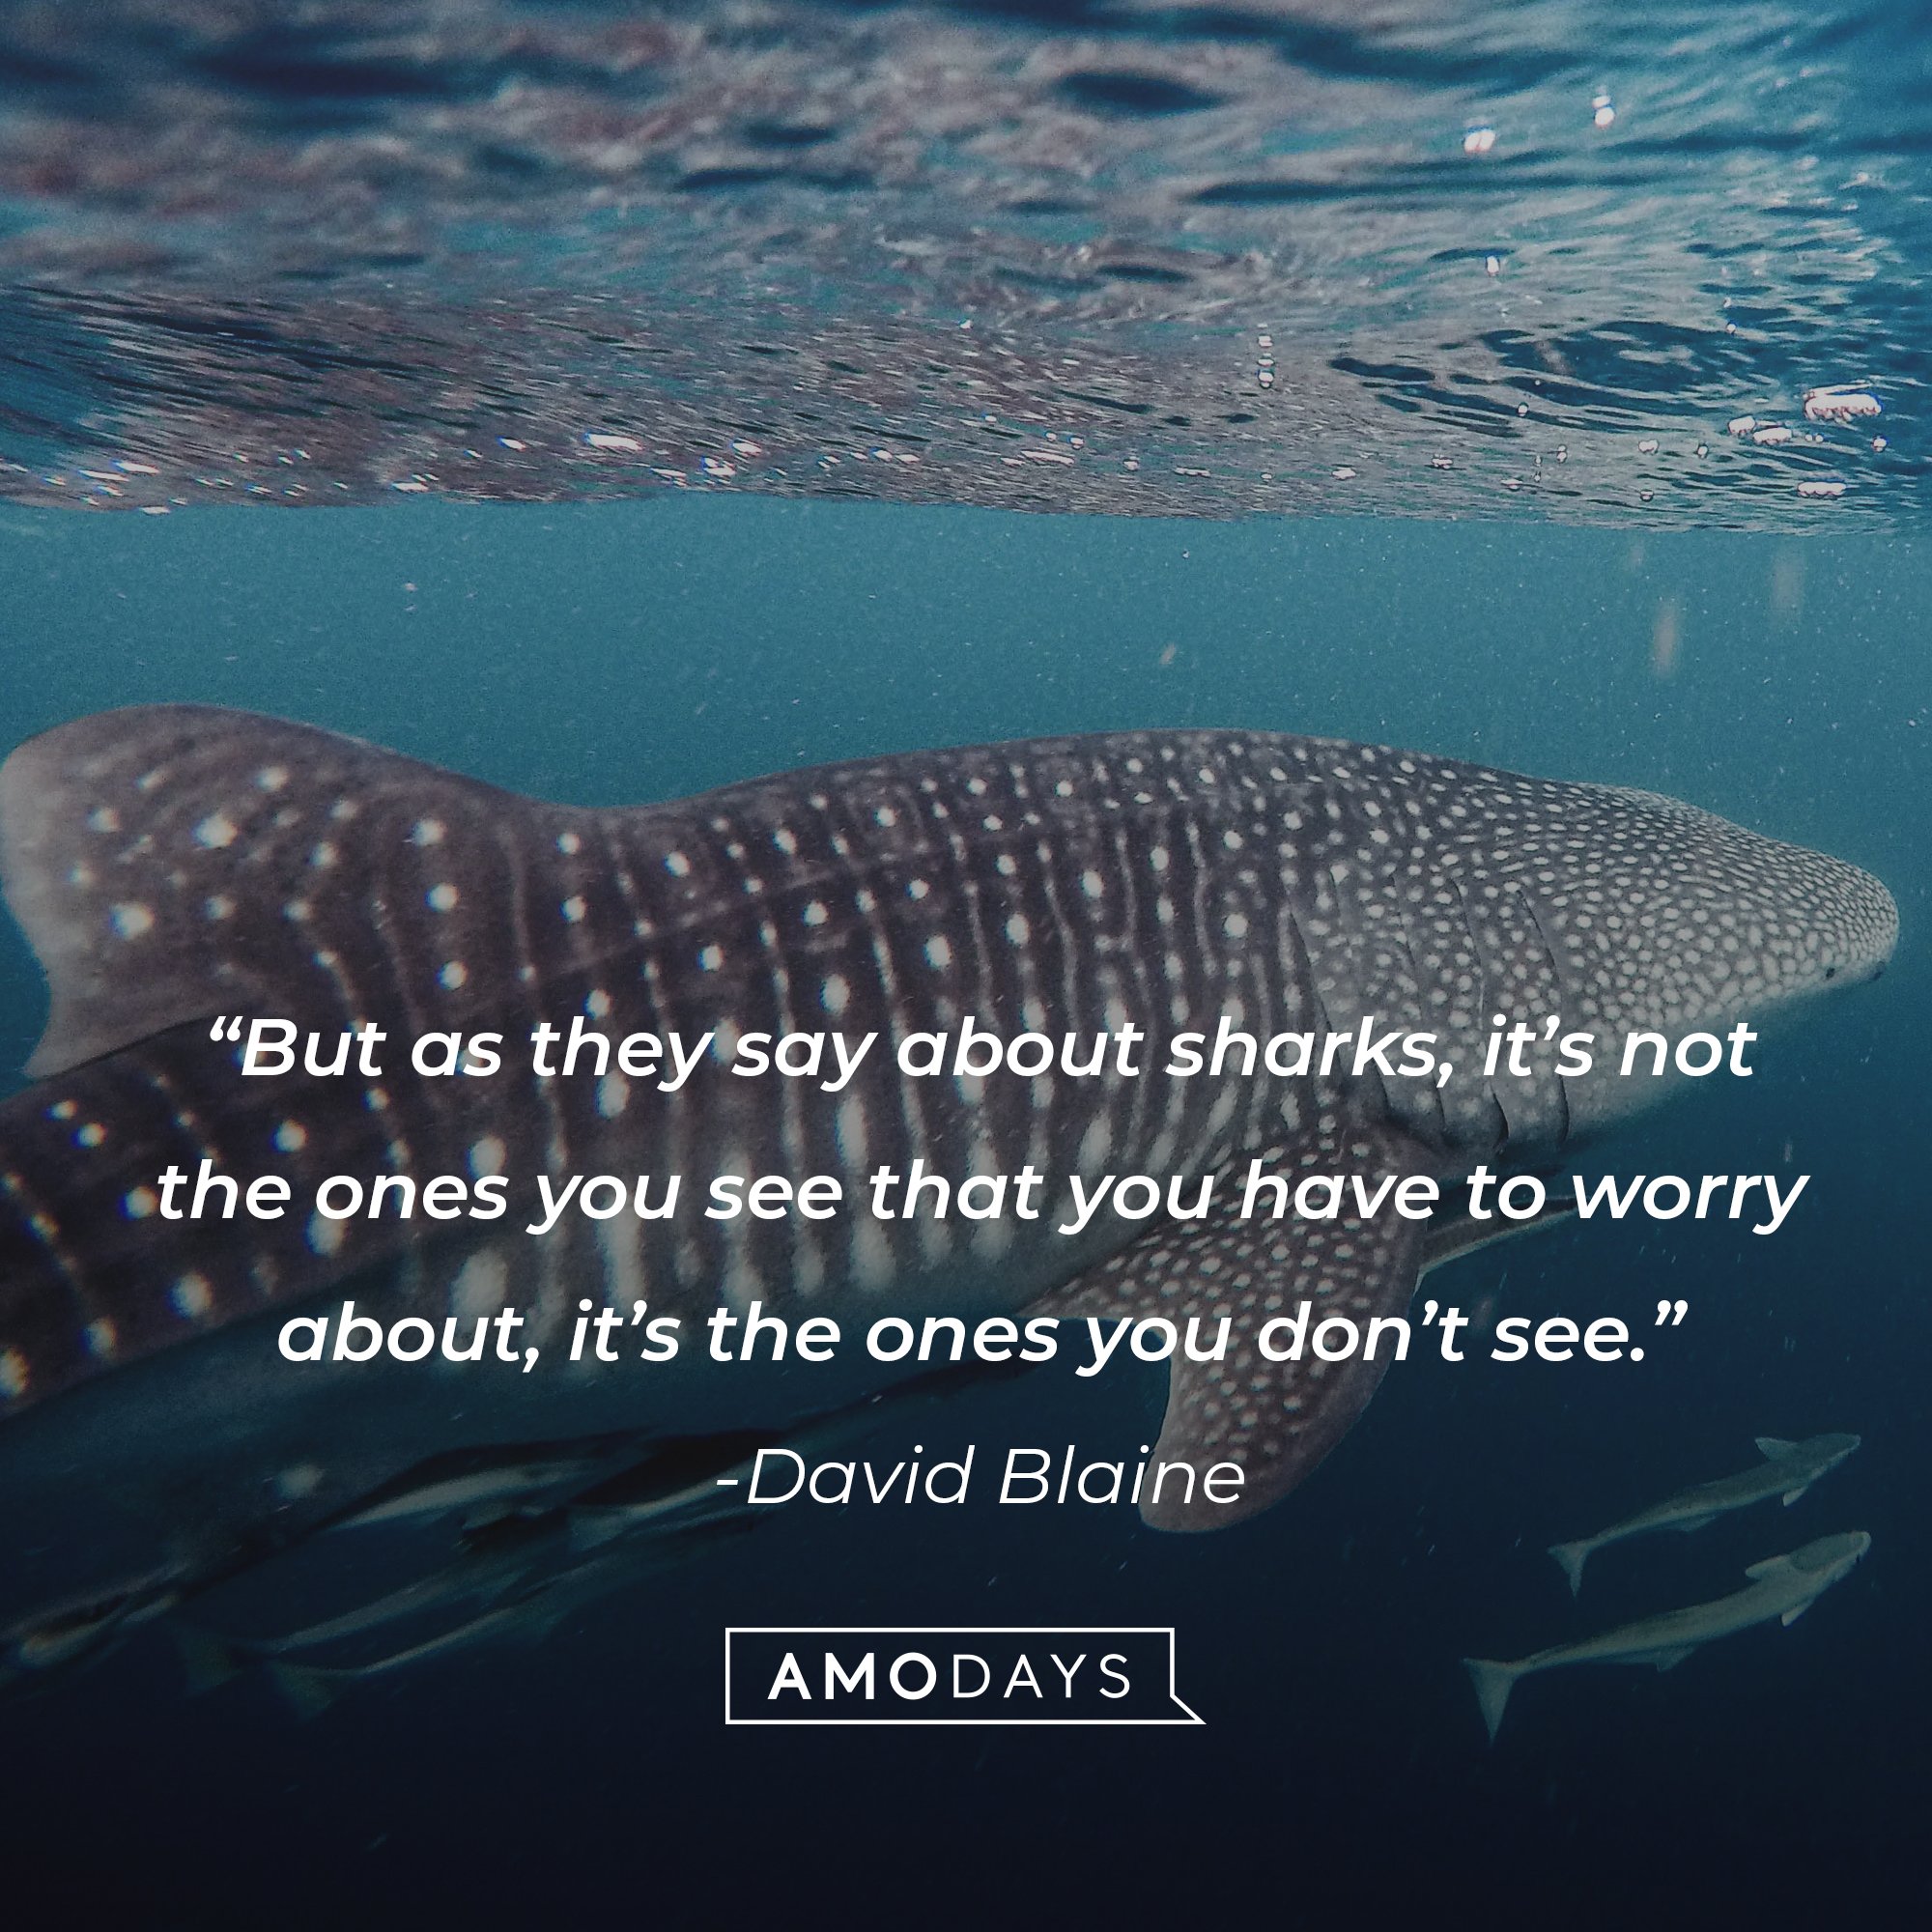 David Blaine's quote: “But as they say about sharks, it’s not the ones you see that you have to worry about, it’s the ones you don’t see.” | Image: AmoDays 